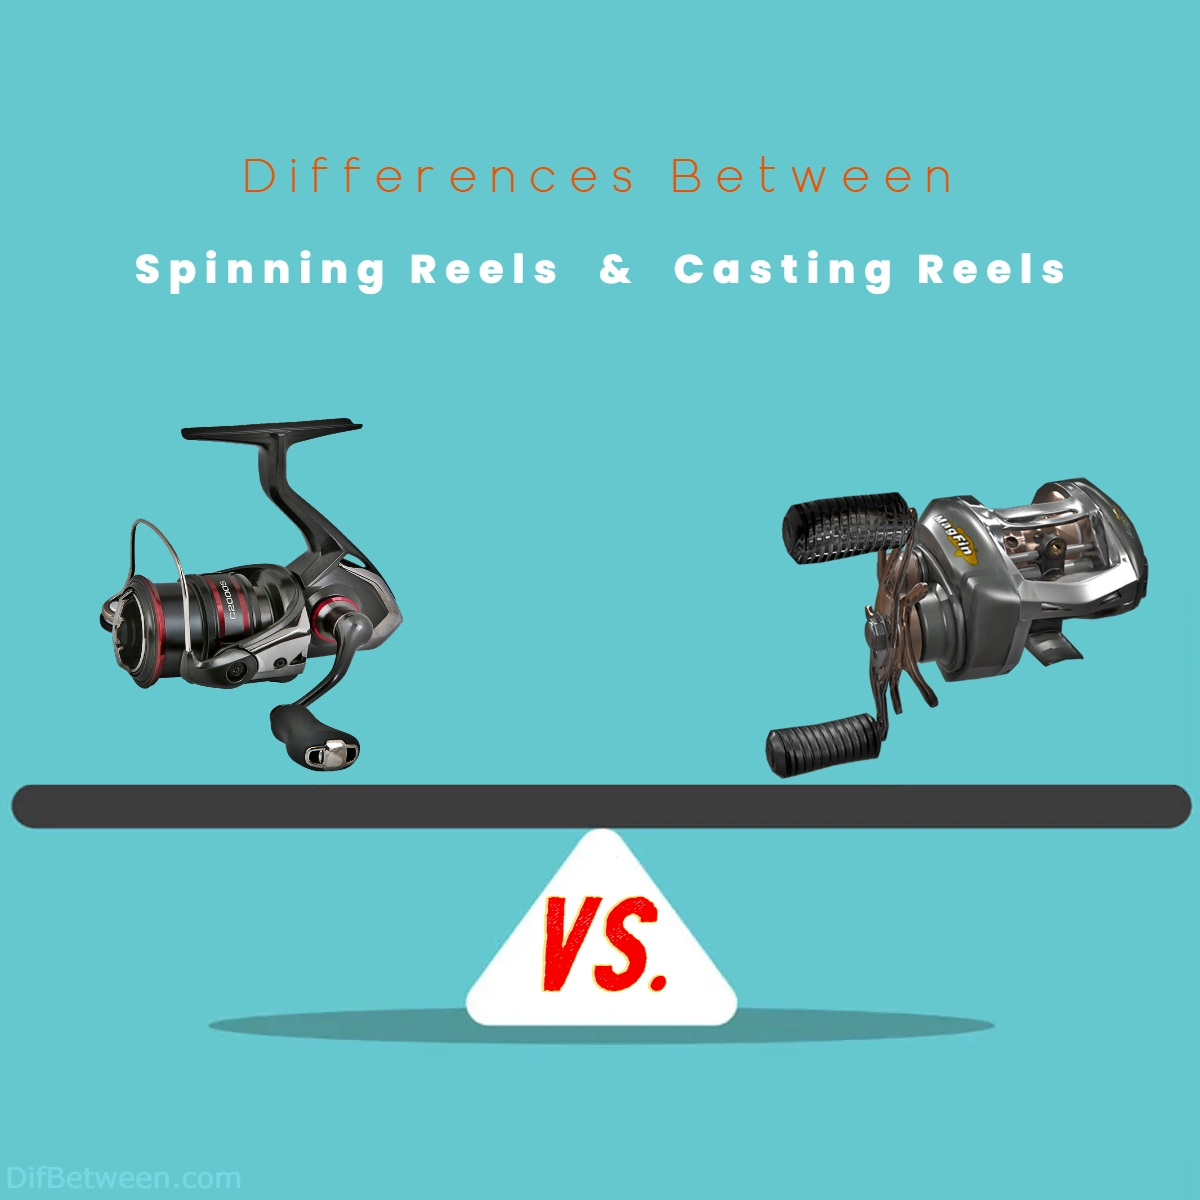 Difference Between Spinning and Casting Reels